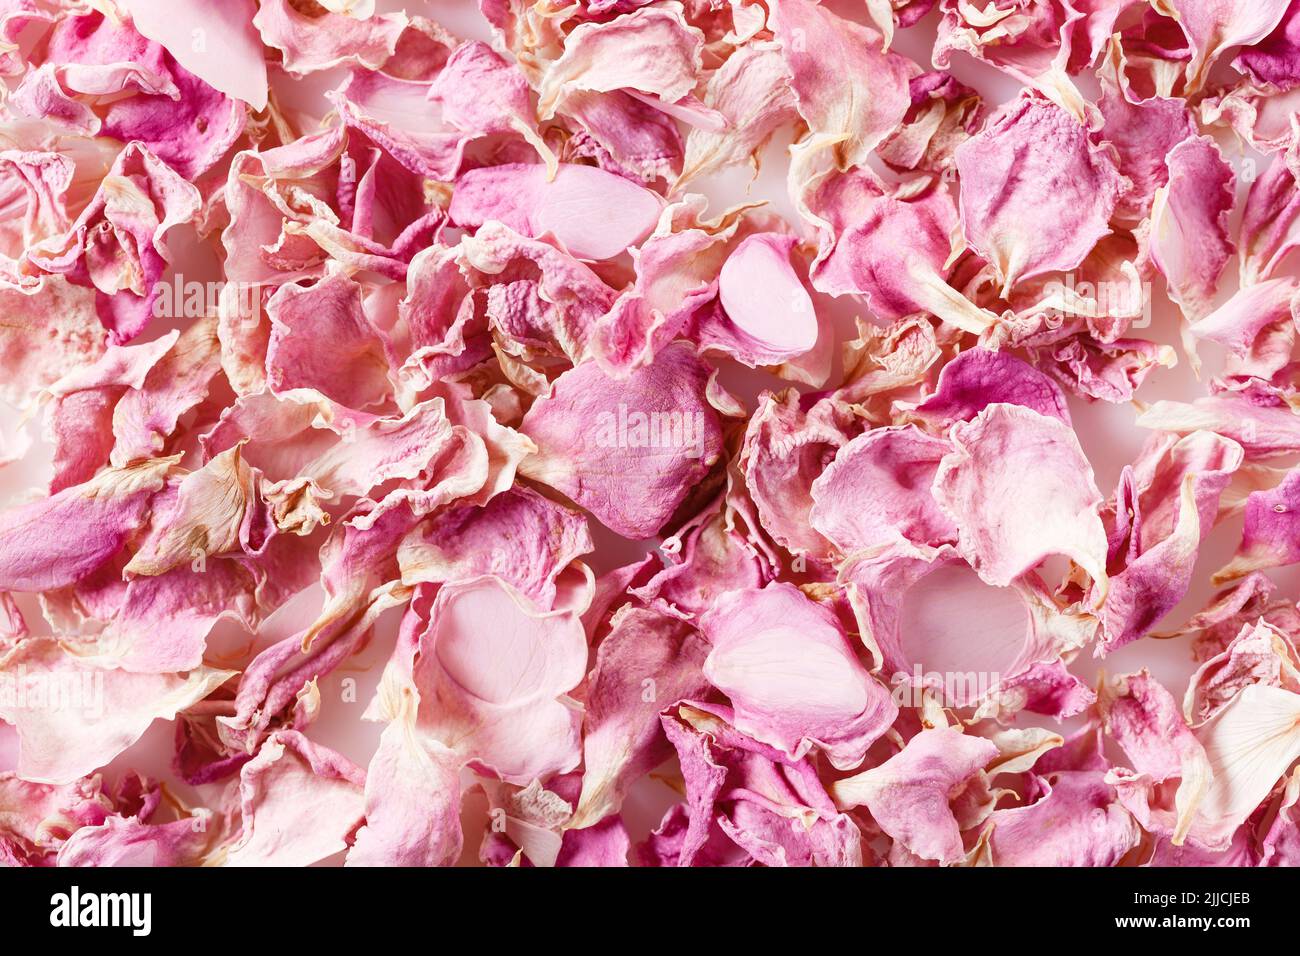 Background made of dried red rose petals isolated on white. Natural herbal cosmetics. Top view. Stock Photo